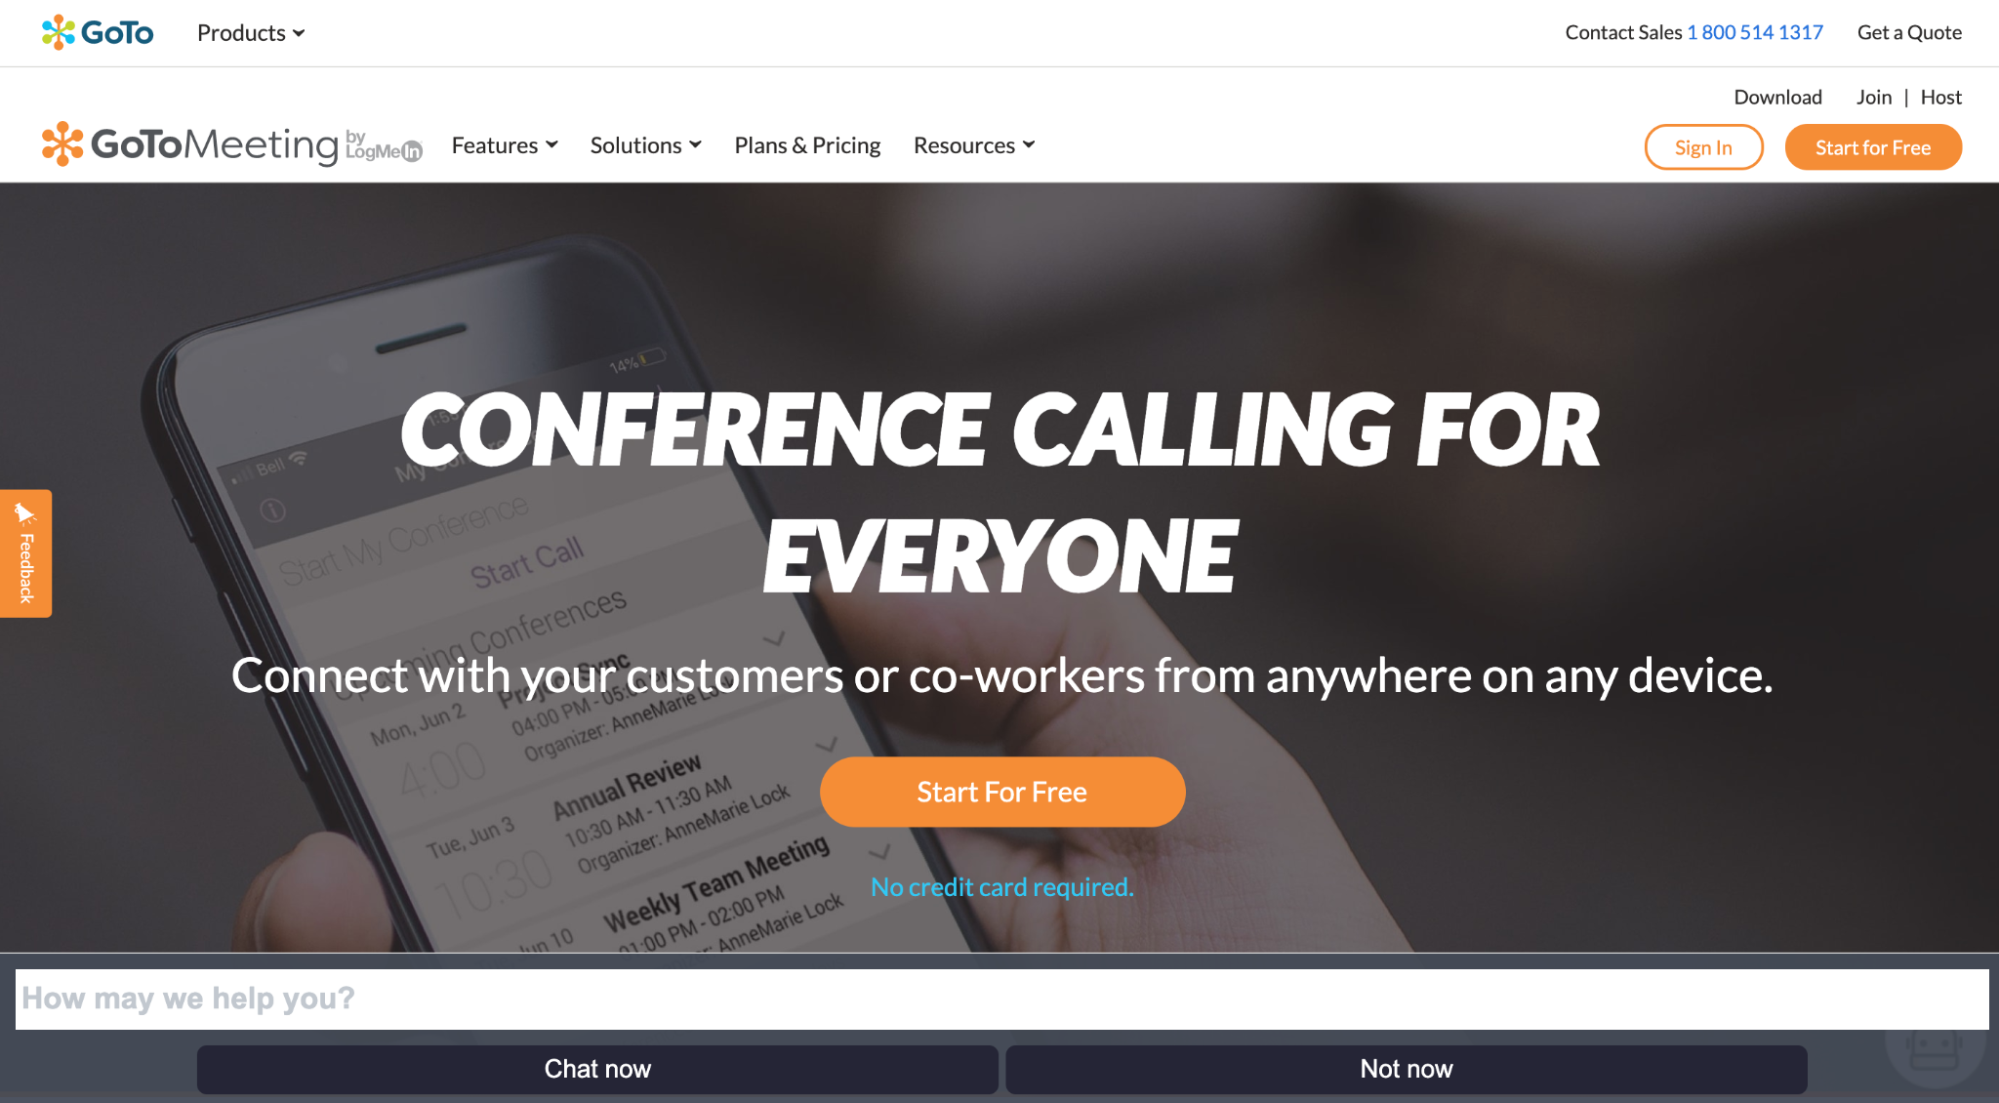 GoToMeeting conference calling start for free page.